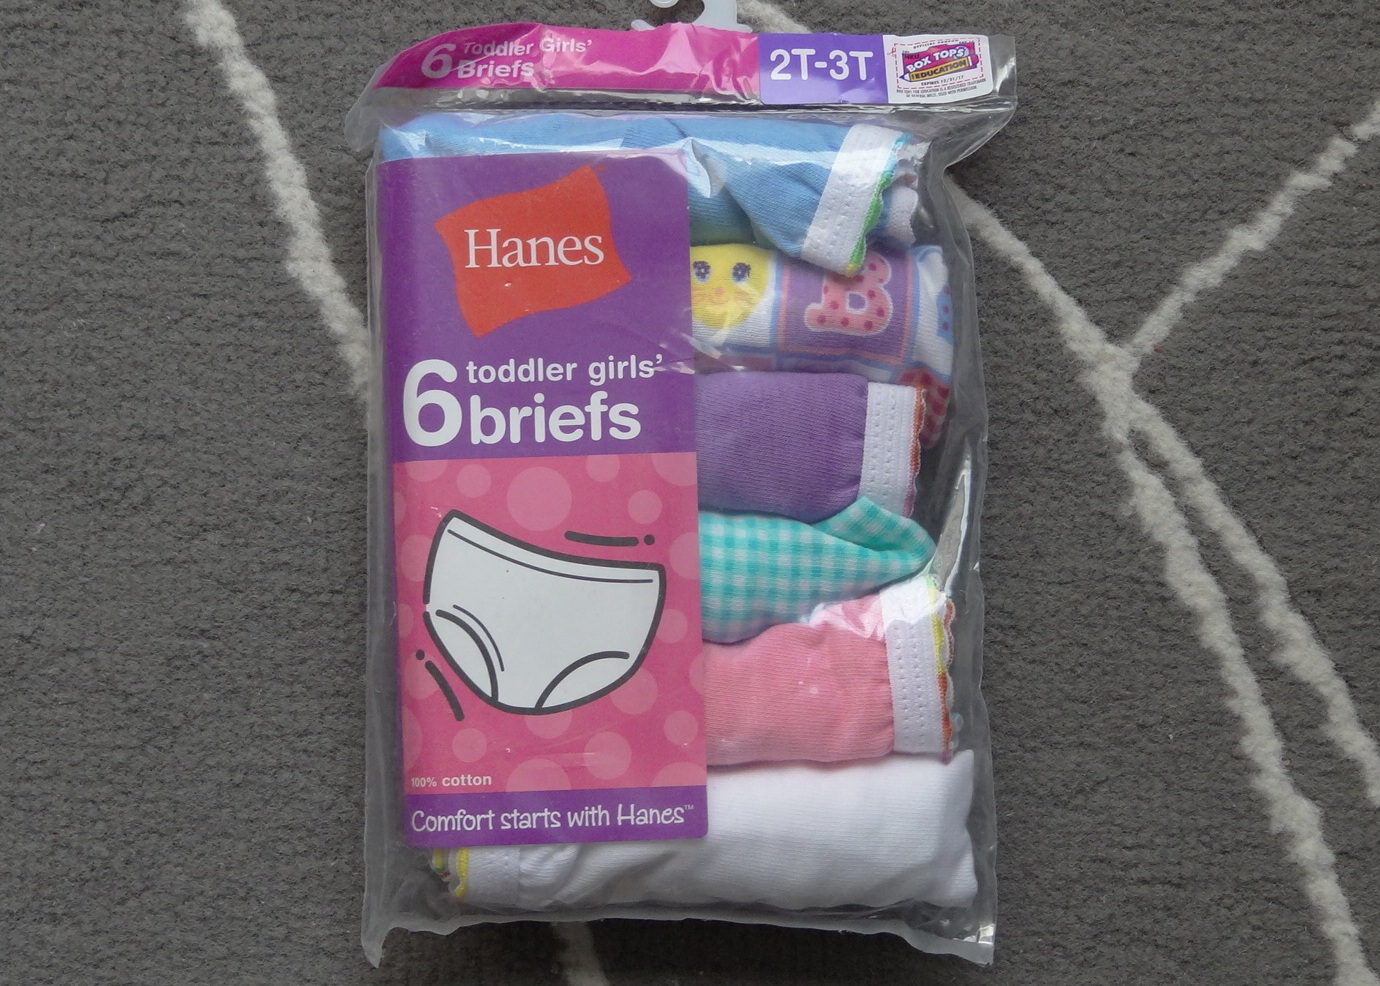 Hanes Toddler Products Review - Hey Trina